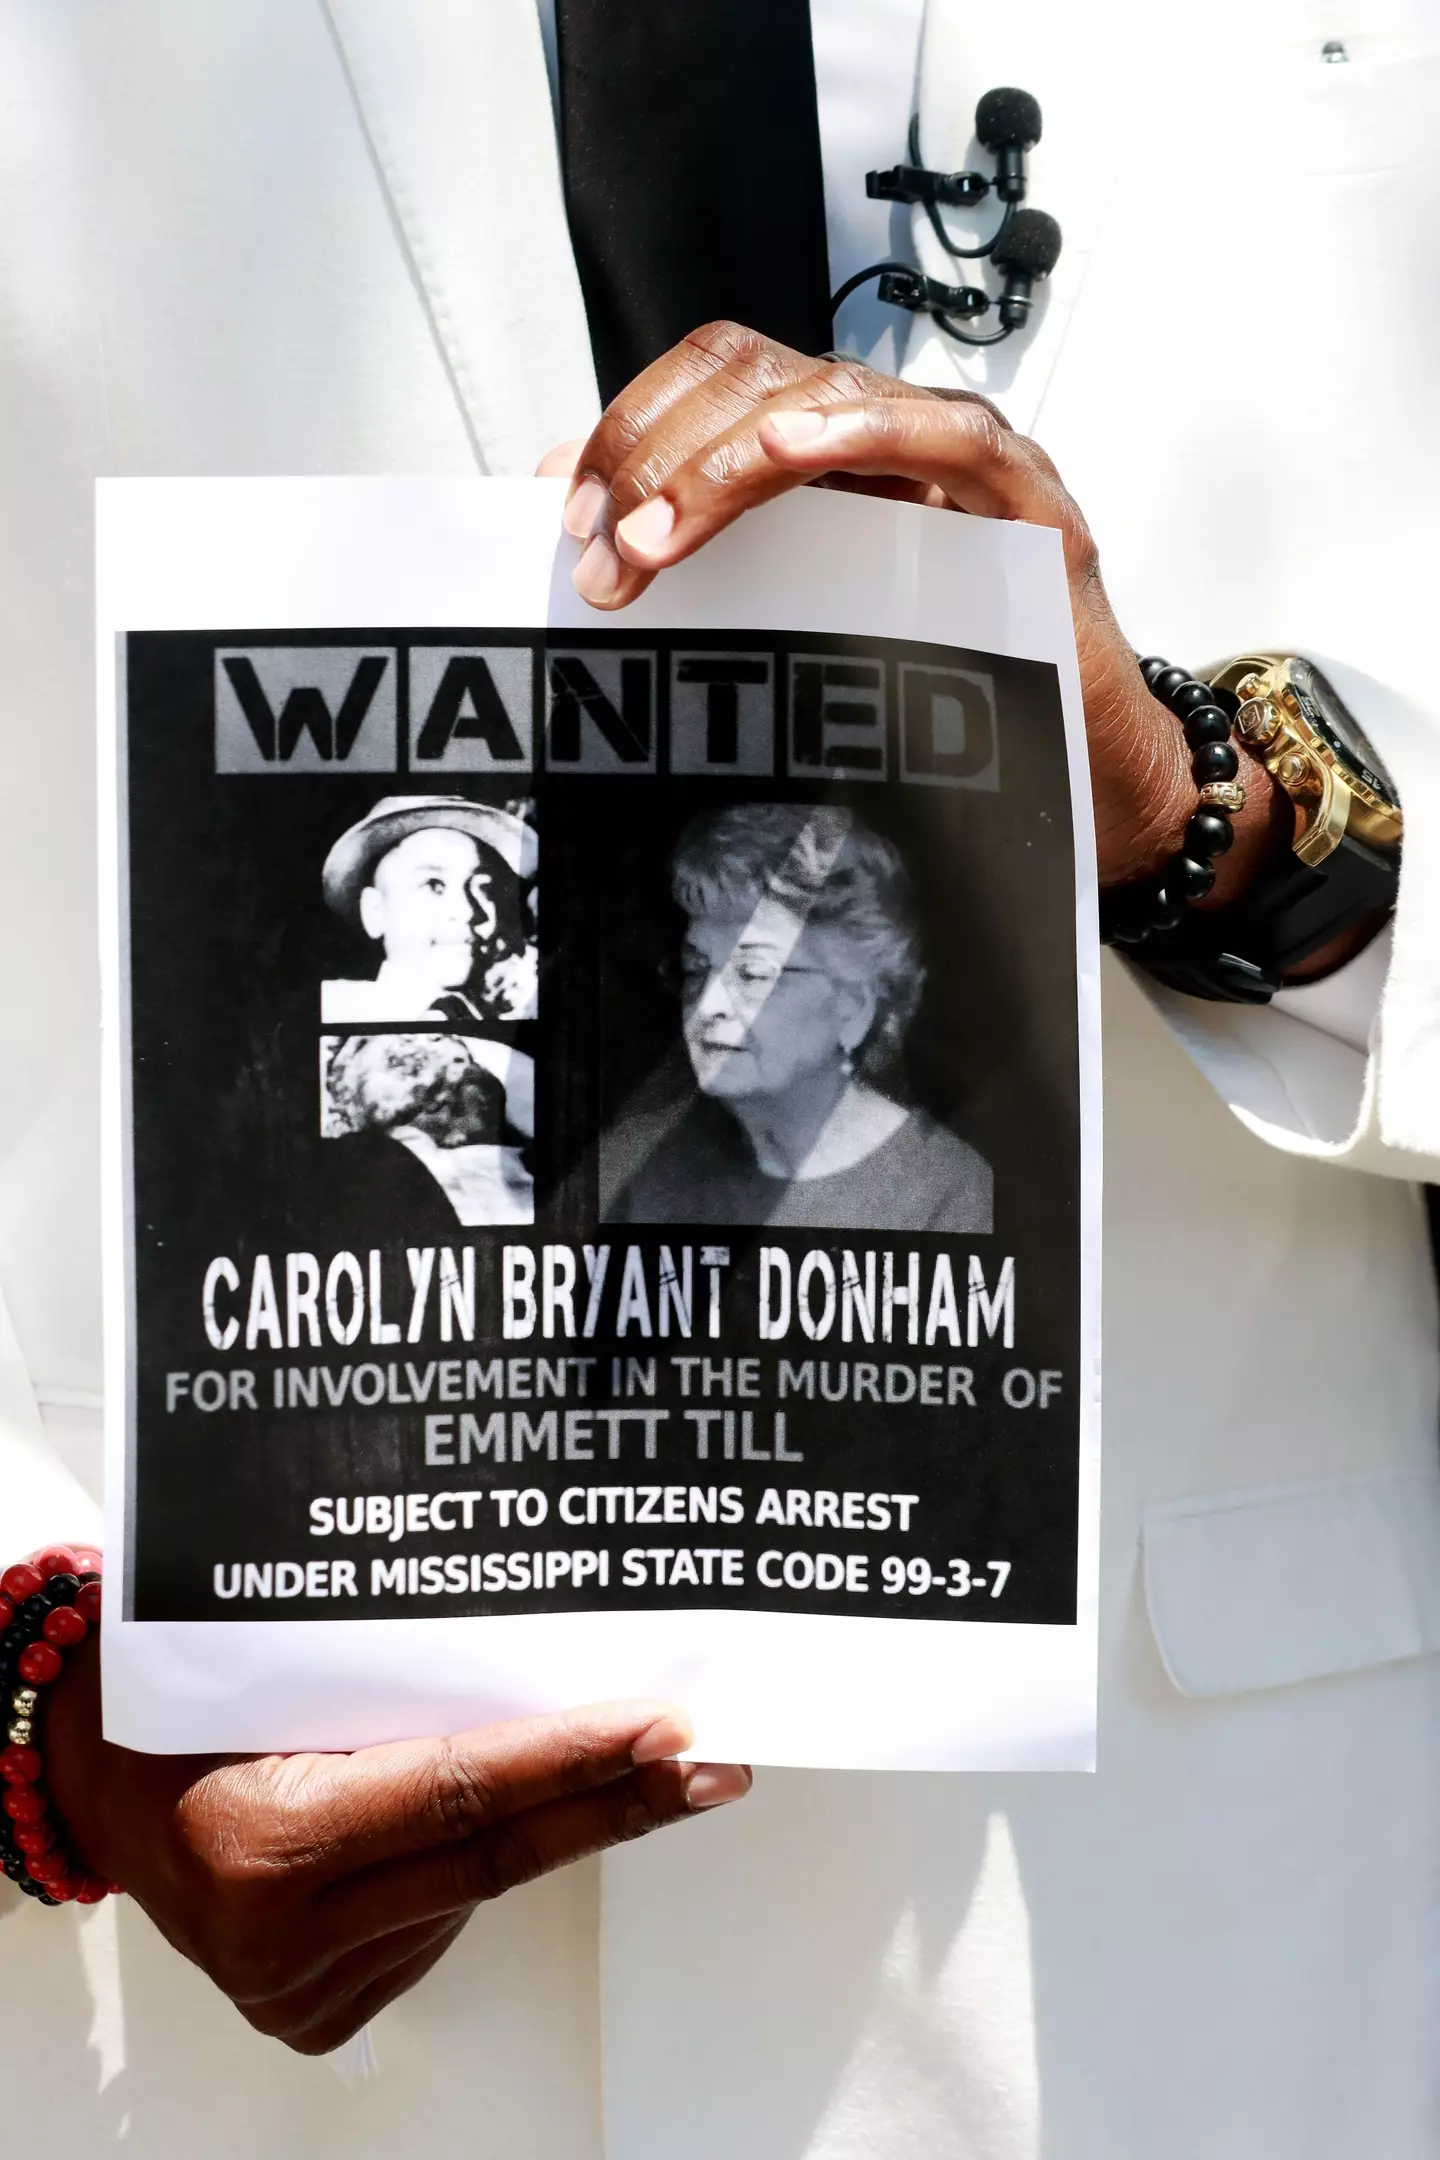 Civil rights activist John C Barnett holds up a wanted poster calling for the arrest of Carolyn Bryant Donham.